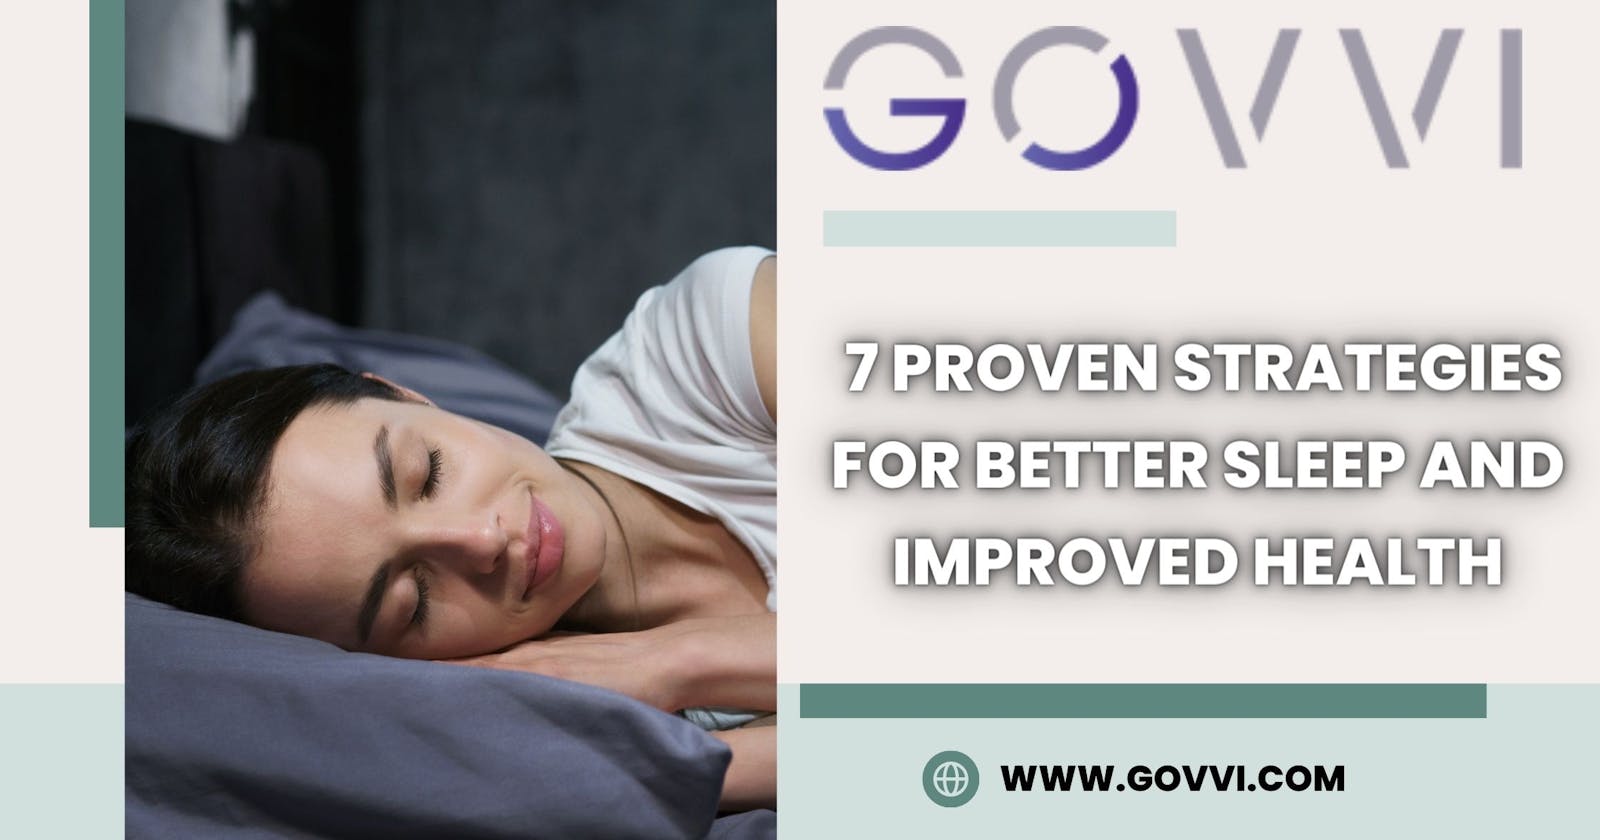 GOVVI - 7 Proven Strategies for Better Sleep and Improved Health